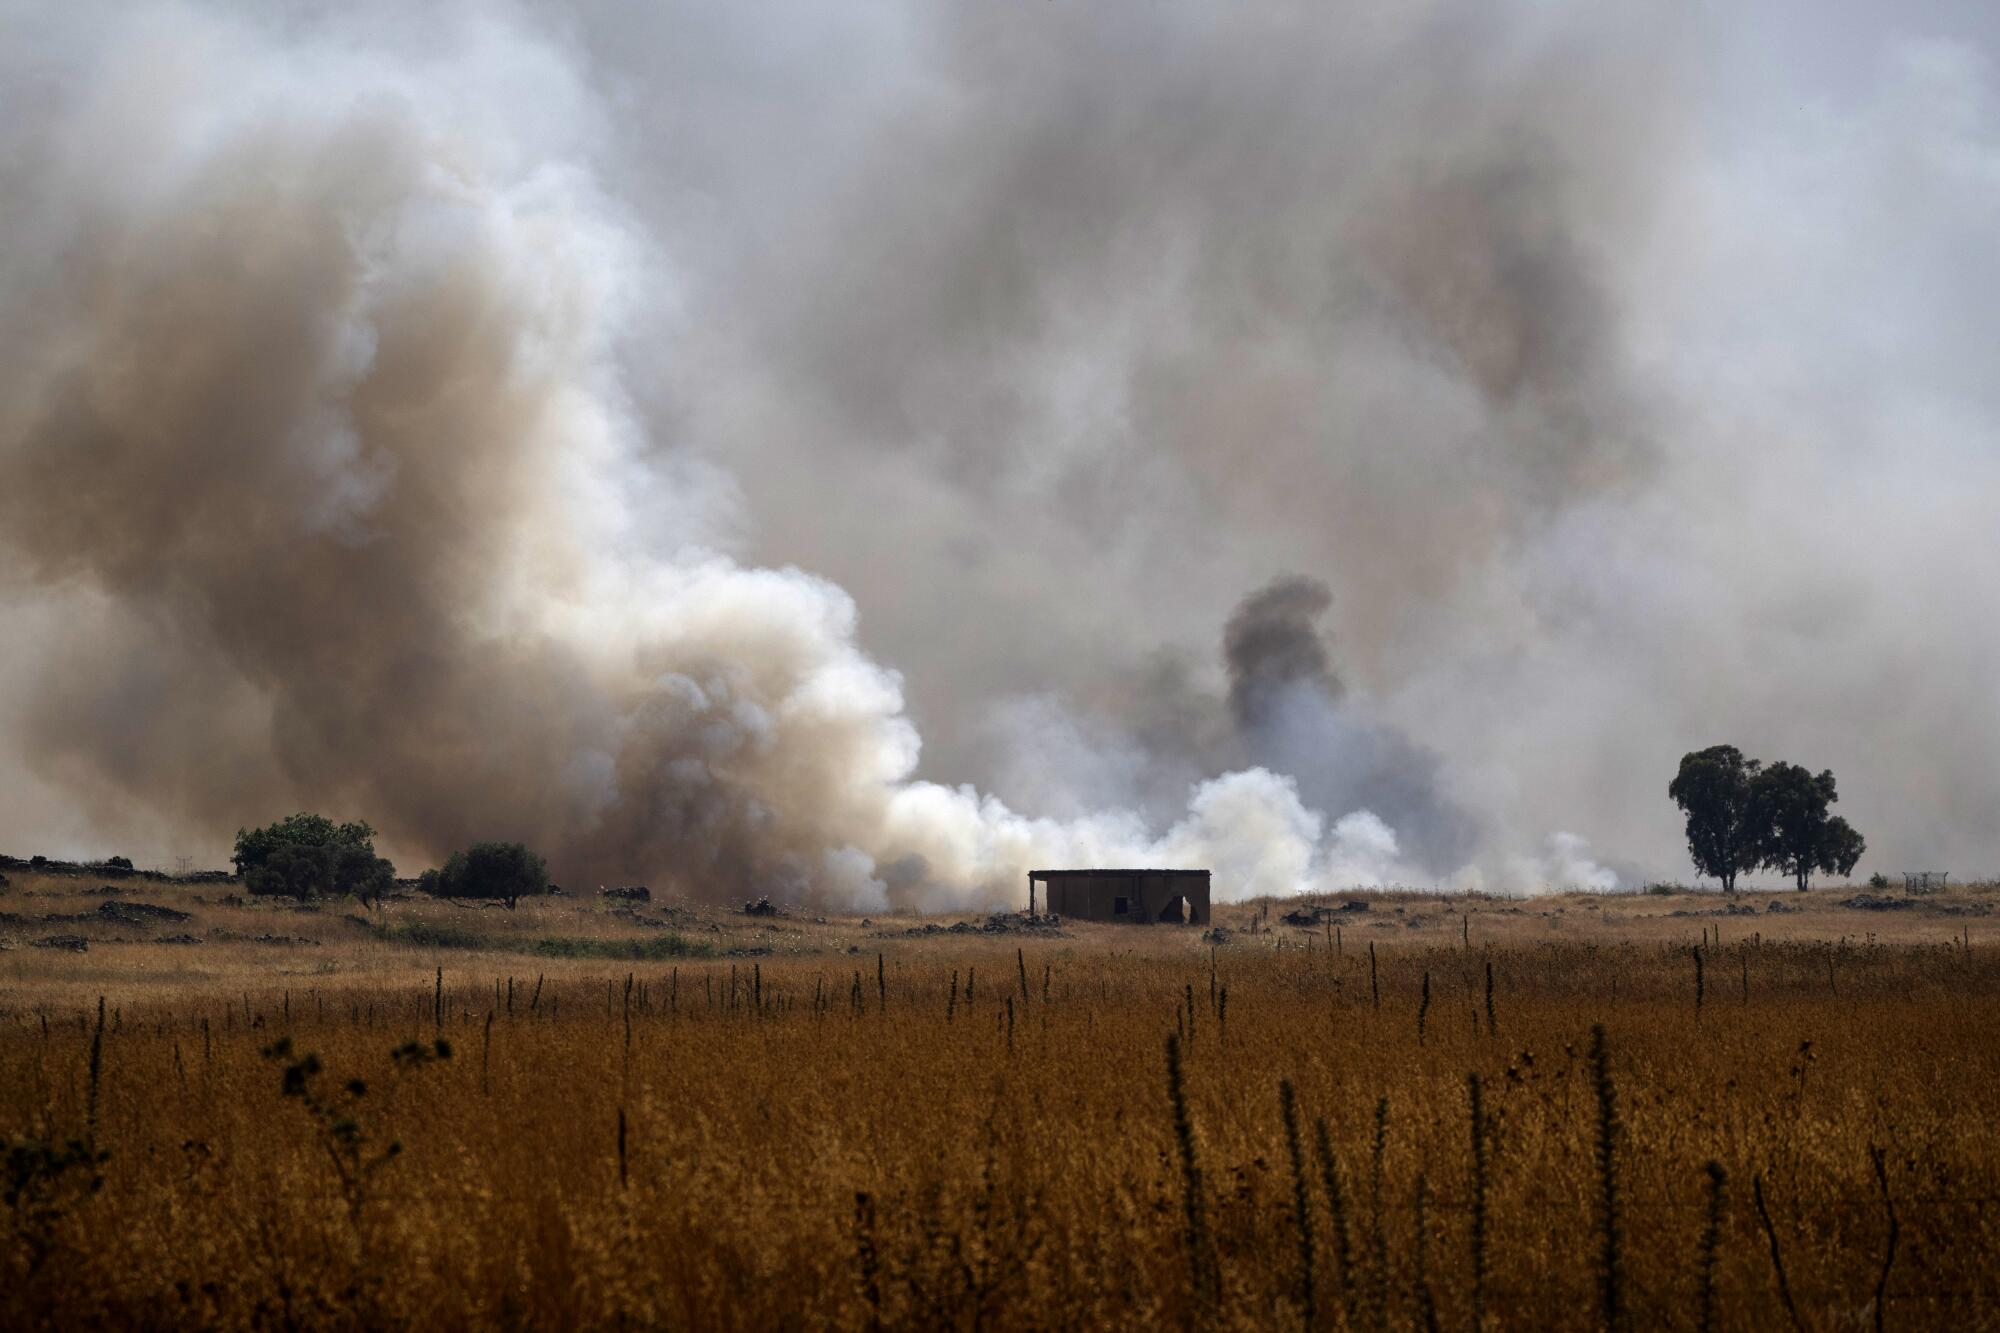 Smoke rises to the sky as a fire burns in an agricultural area.